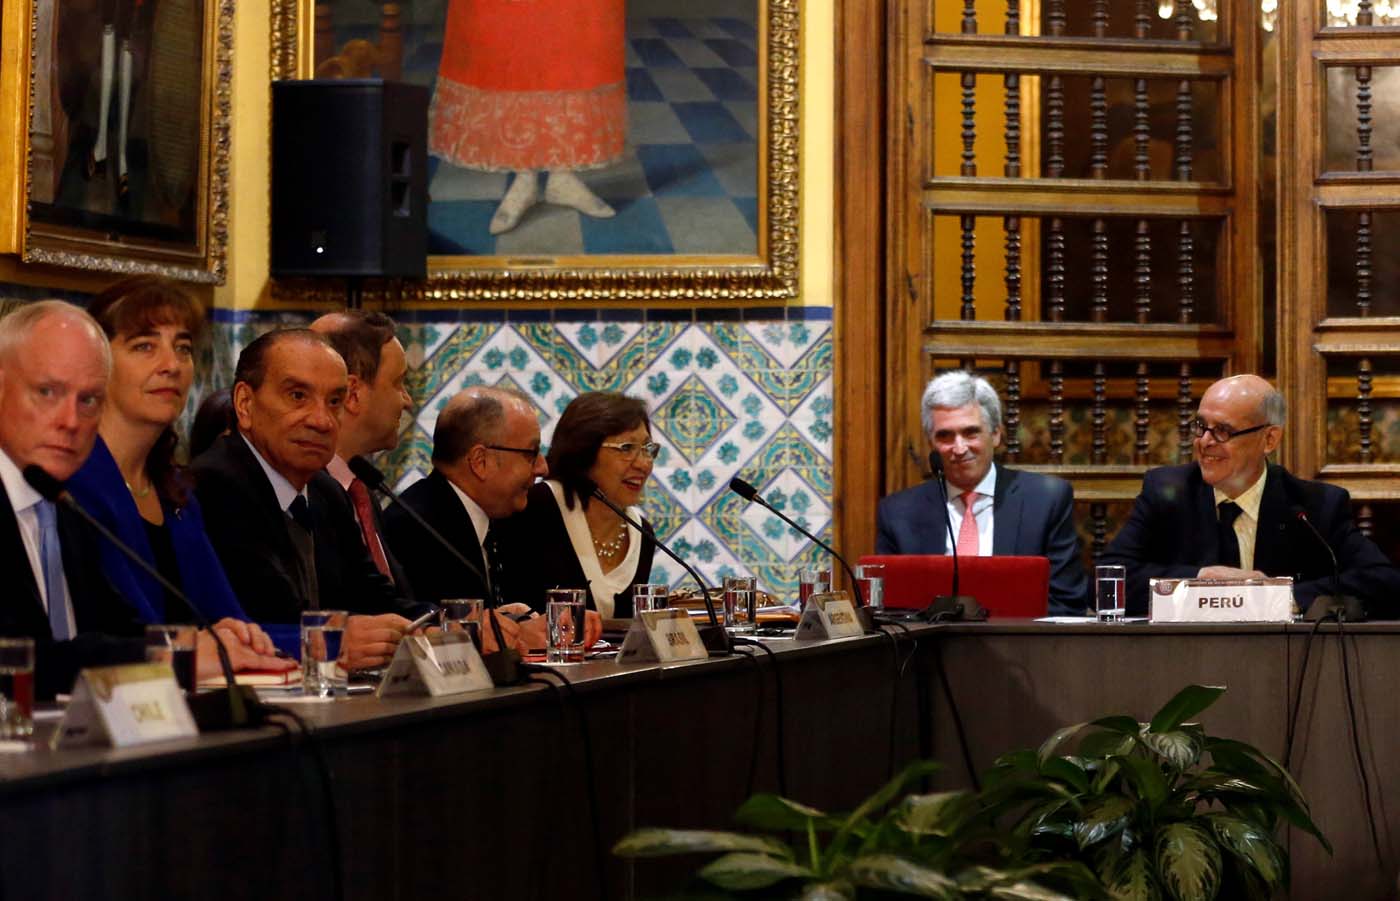 Peru's Foreign affairs minister Ricardo Luna (R) and foreign affairs ministers and representatives from across the Americas meet to discuss issues related to the Venezuelan crisis in Lima, Peru August 8, 2017. REUTERS/Mariana Bazo